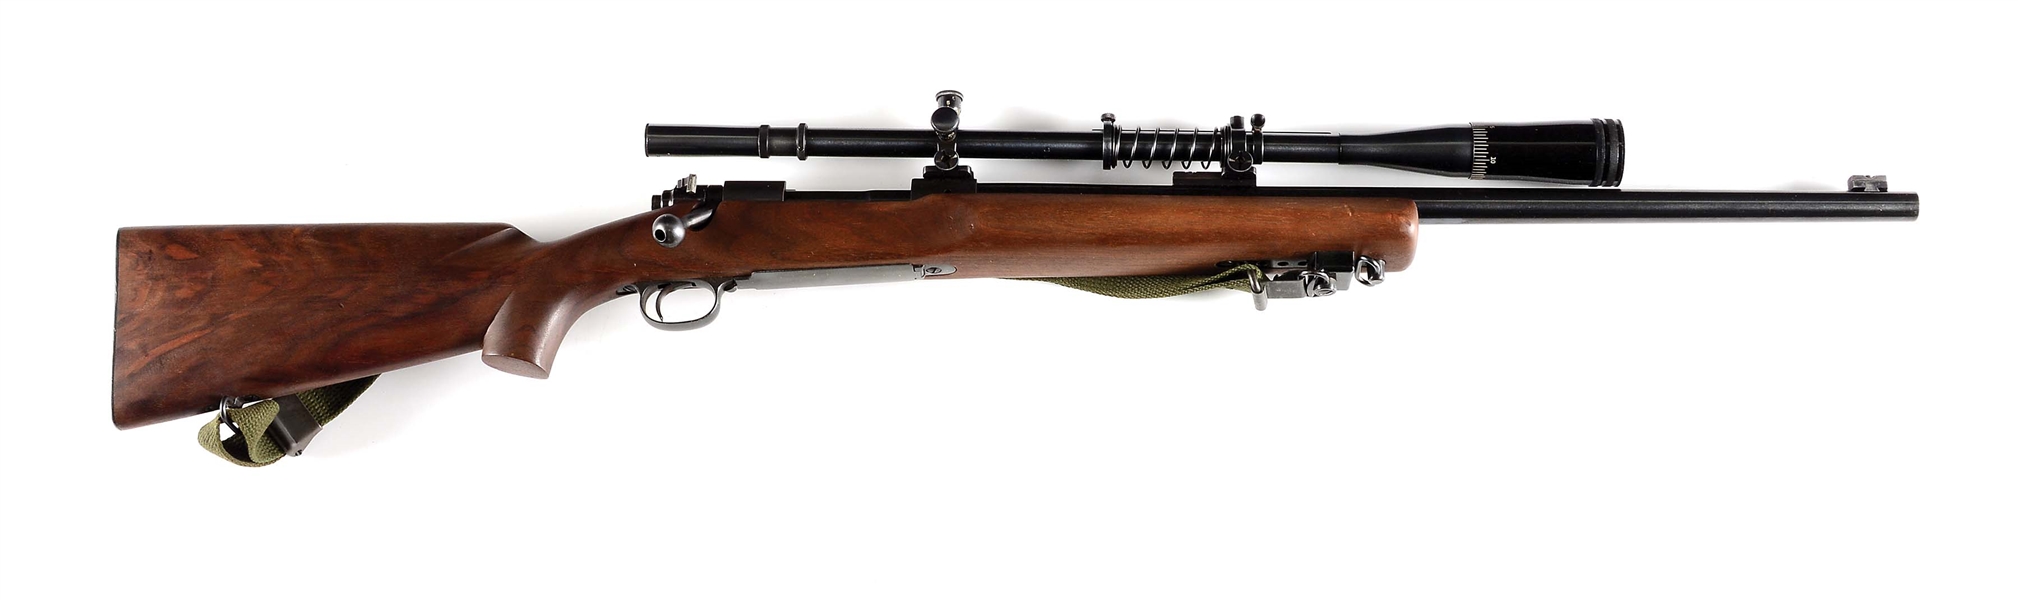 (C) US PROPERTY MARKED WINCHESTER MODEL 70 BOLT ACTION TARGET RIFLE.